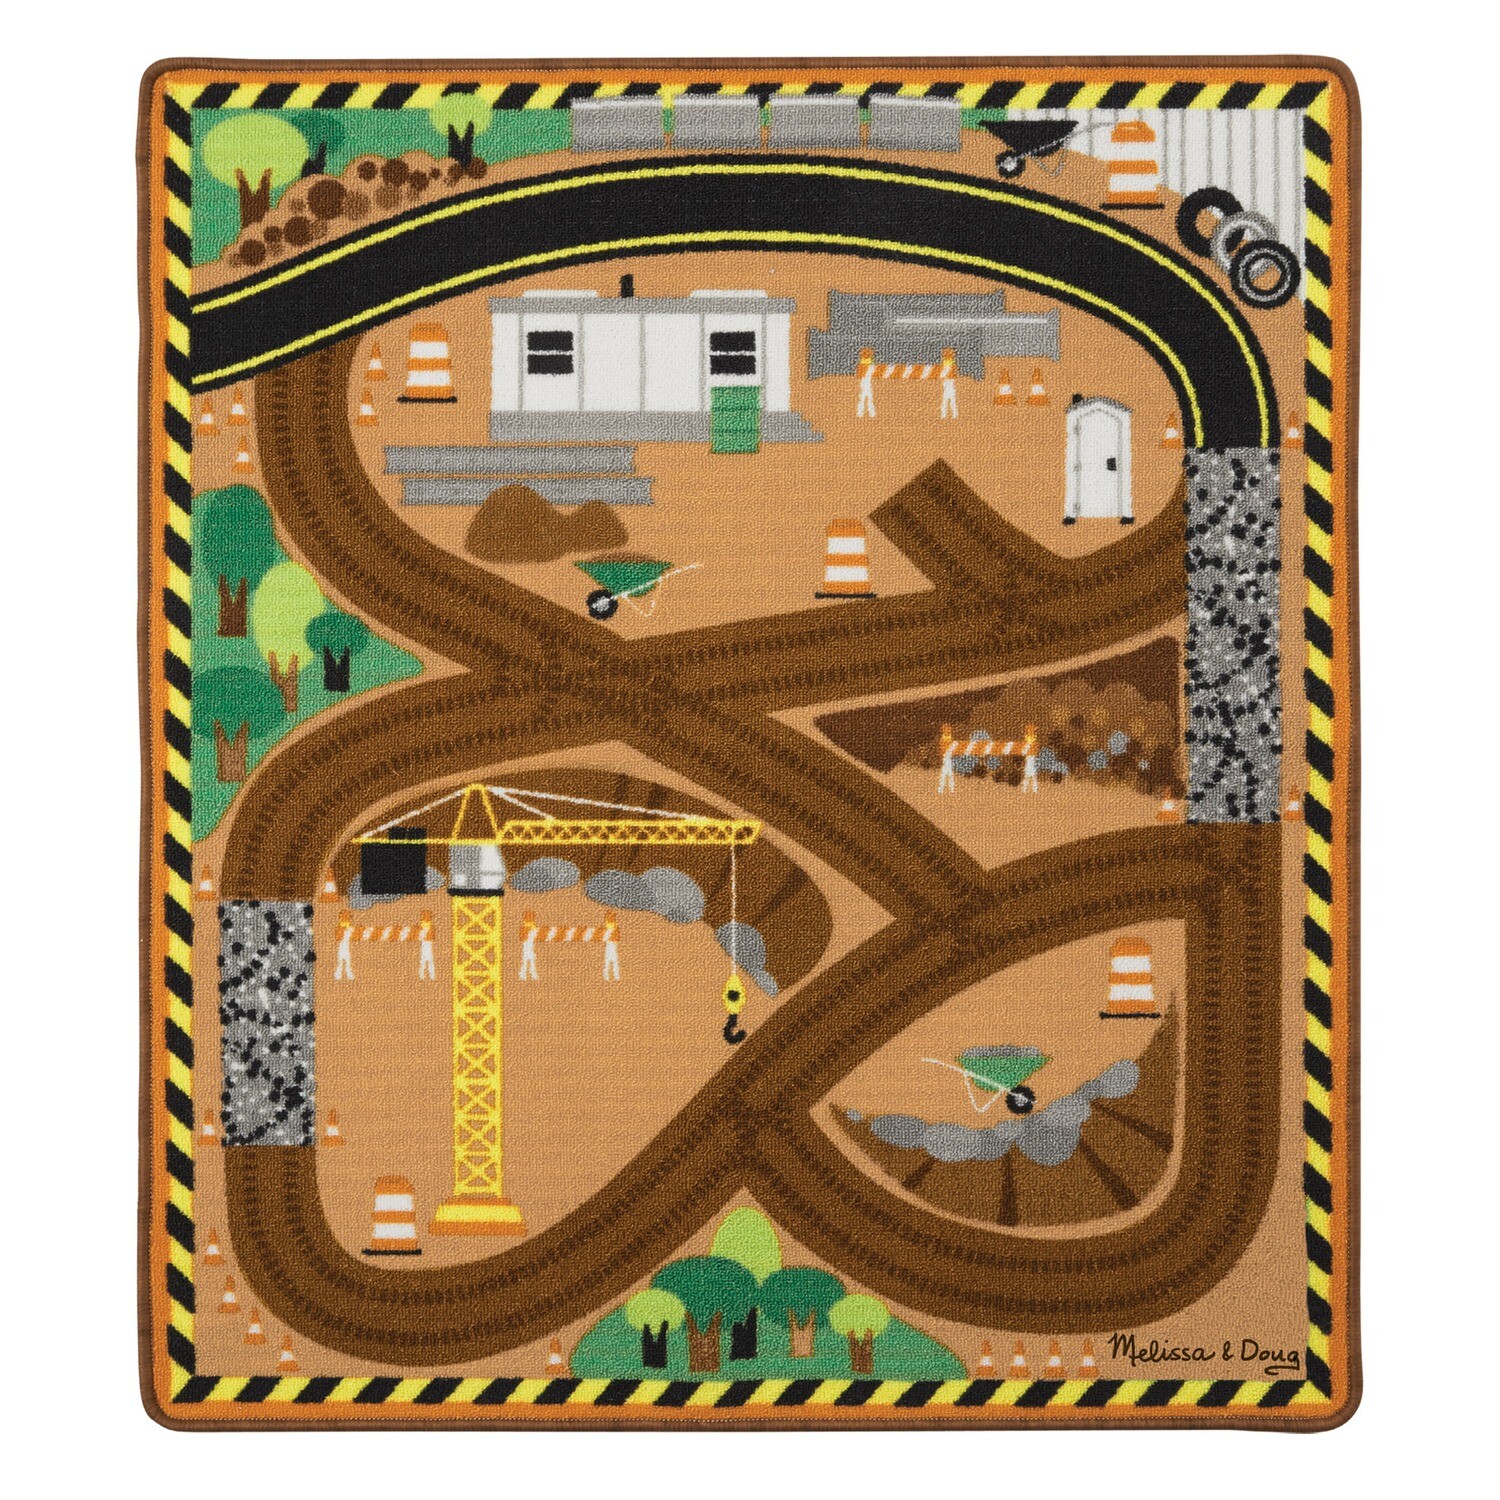 Round the Site Construction Truck Rug